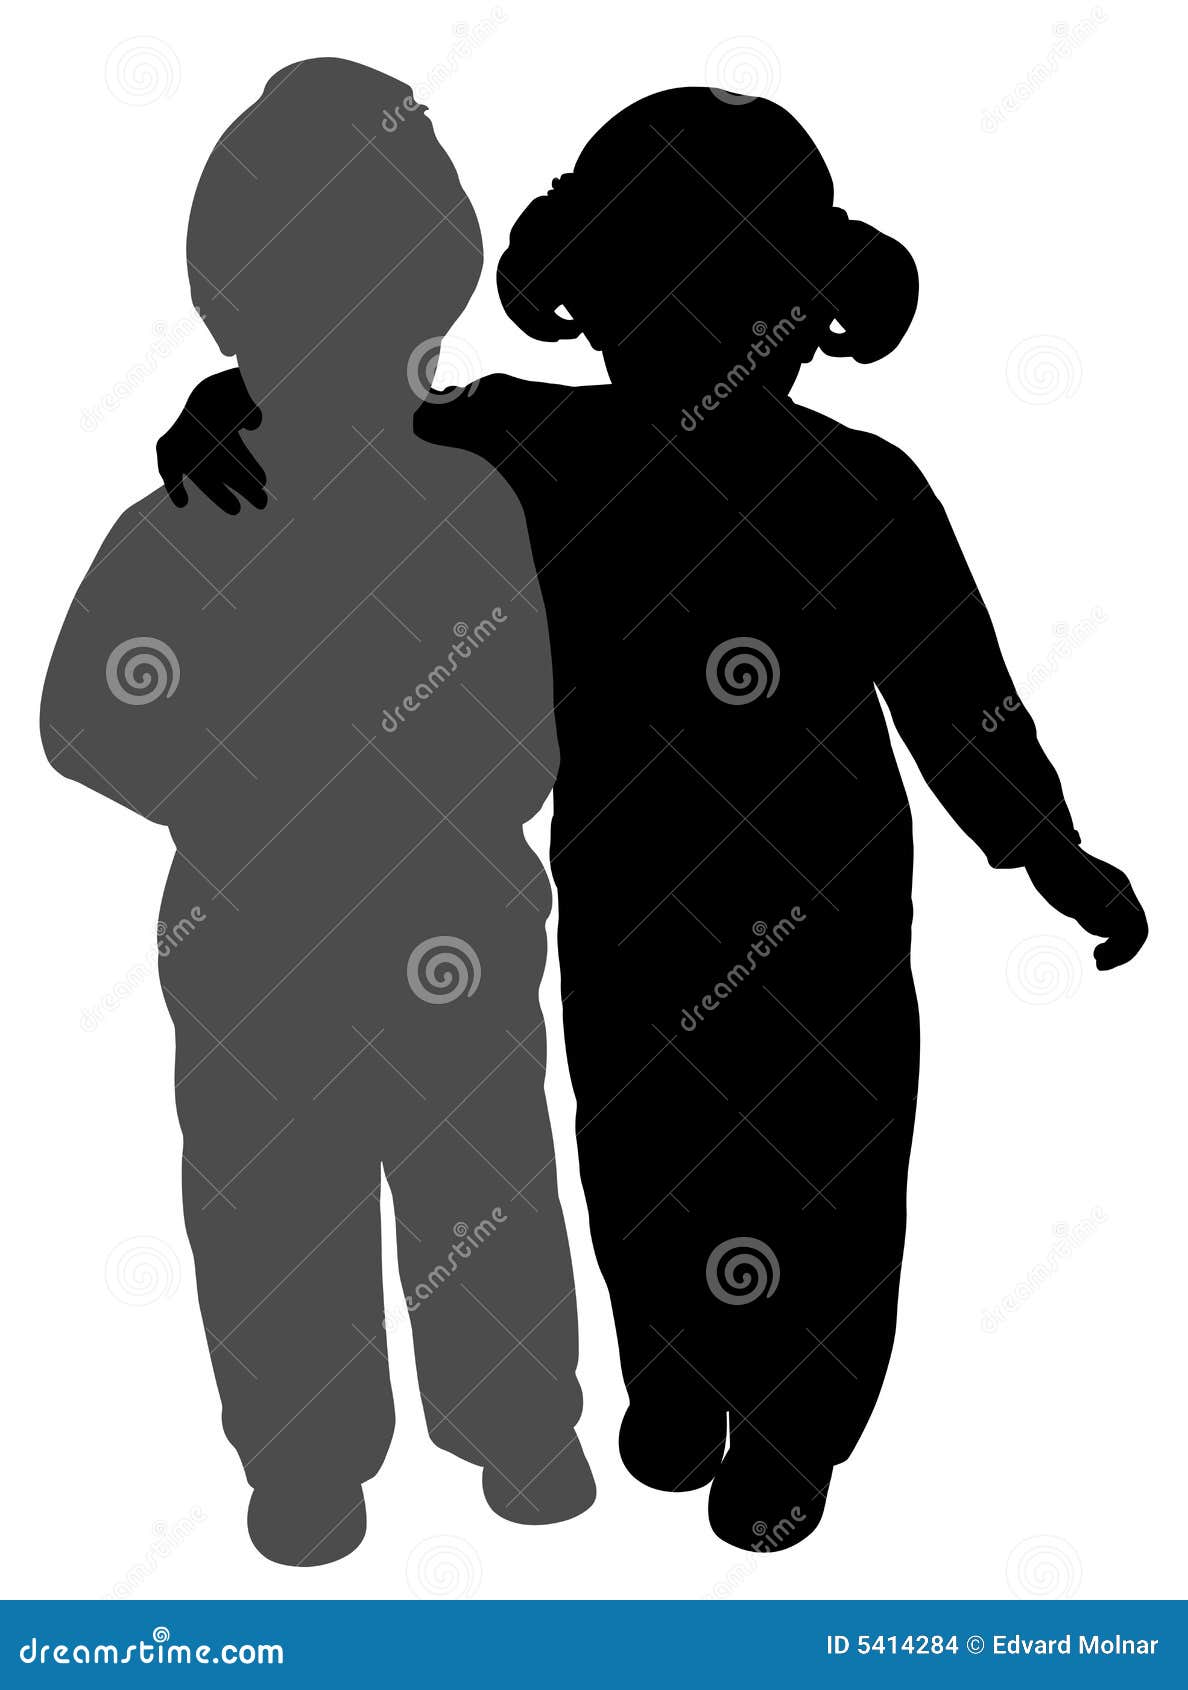 Brother and sister stock vector. Illustration of couple - 5414284